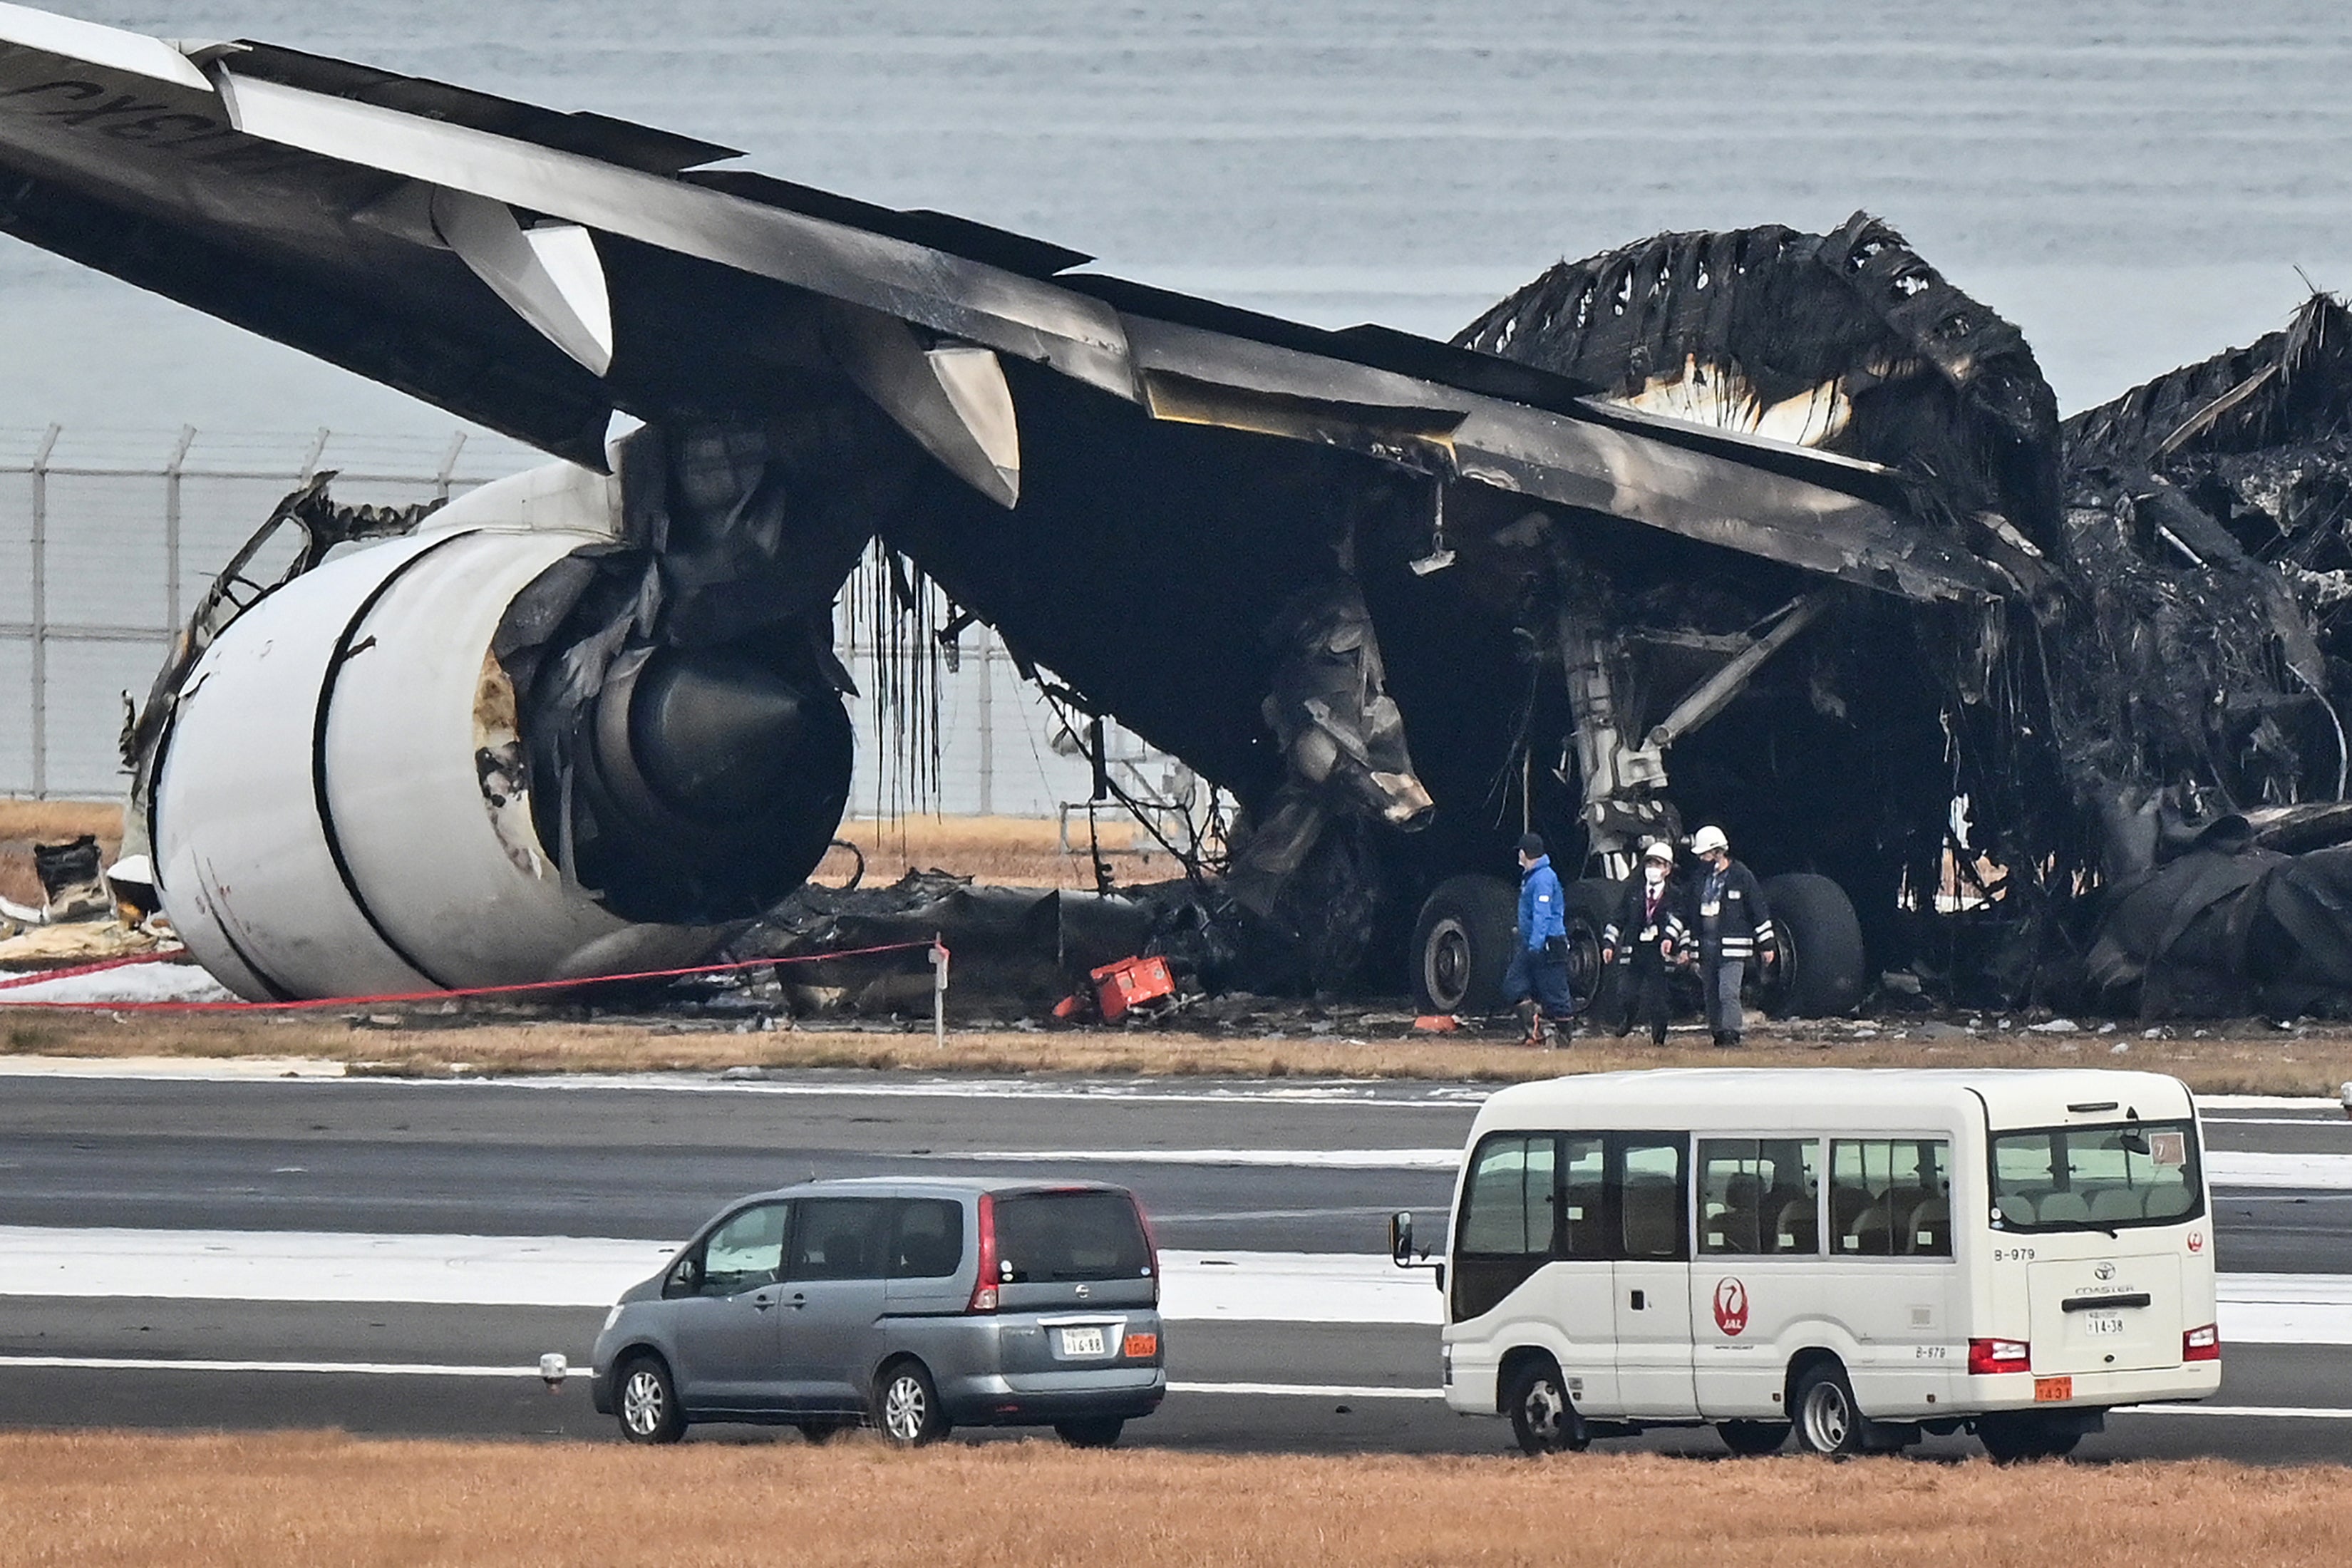 Officials look at the burnt wreckage of the Japan Airlines plane